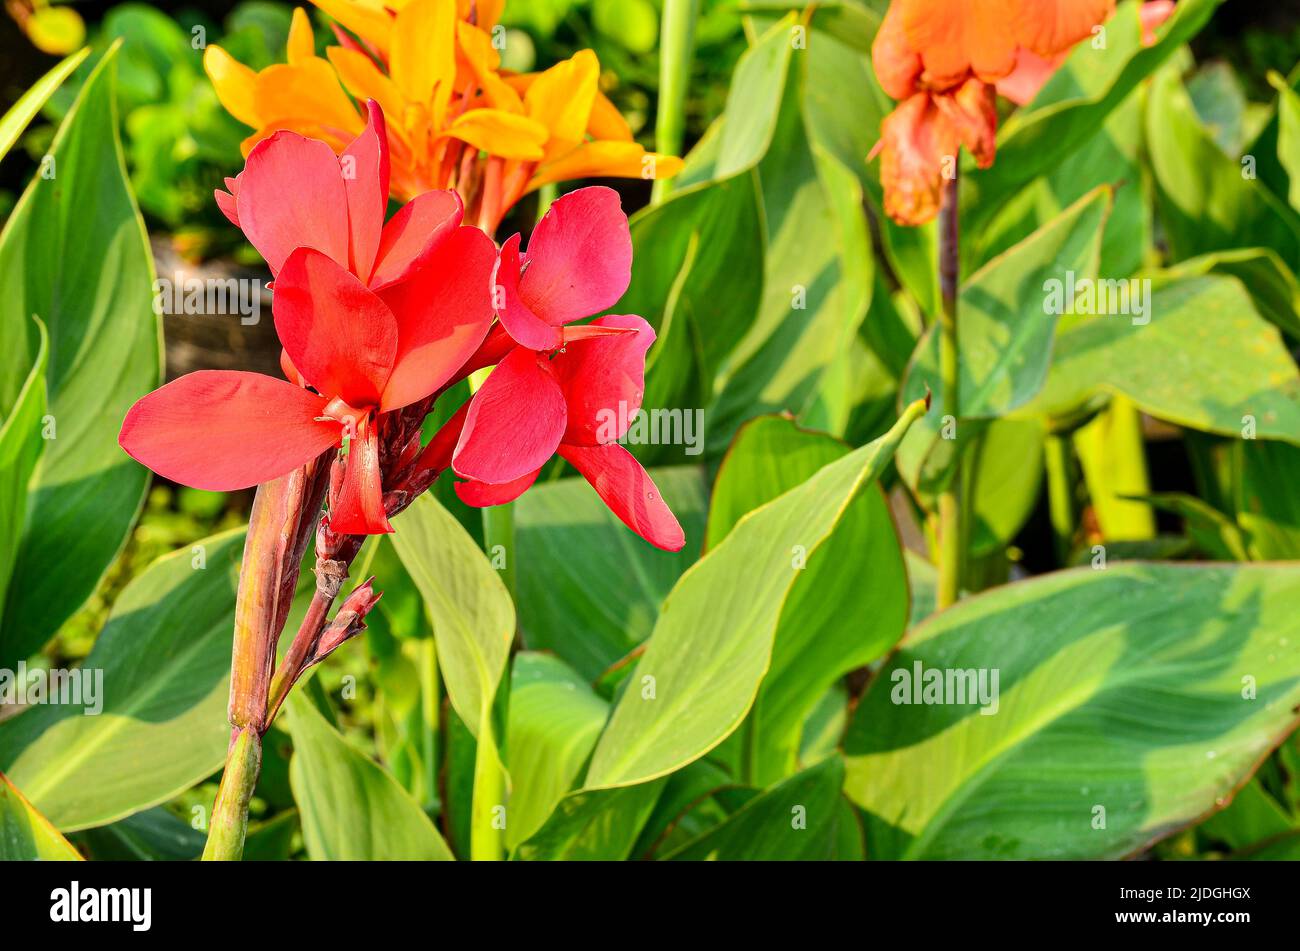 Red canna flower blooming in garden Stock Photo